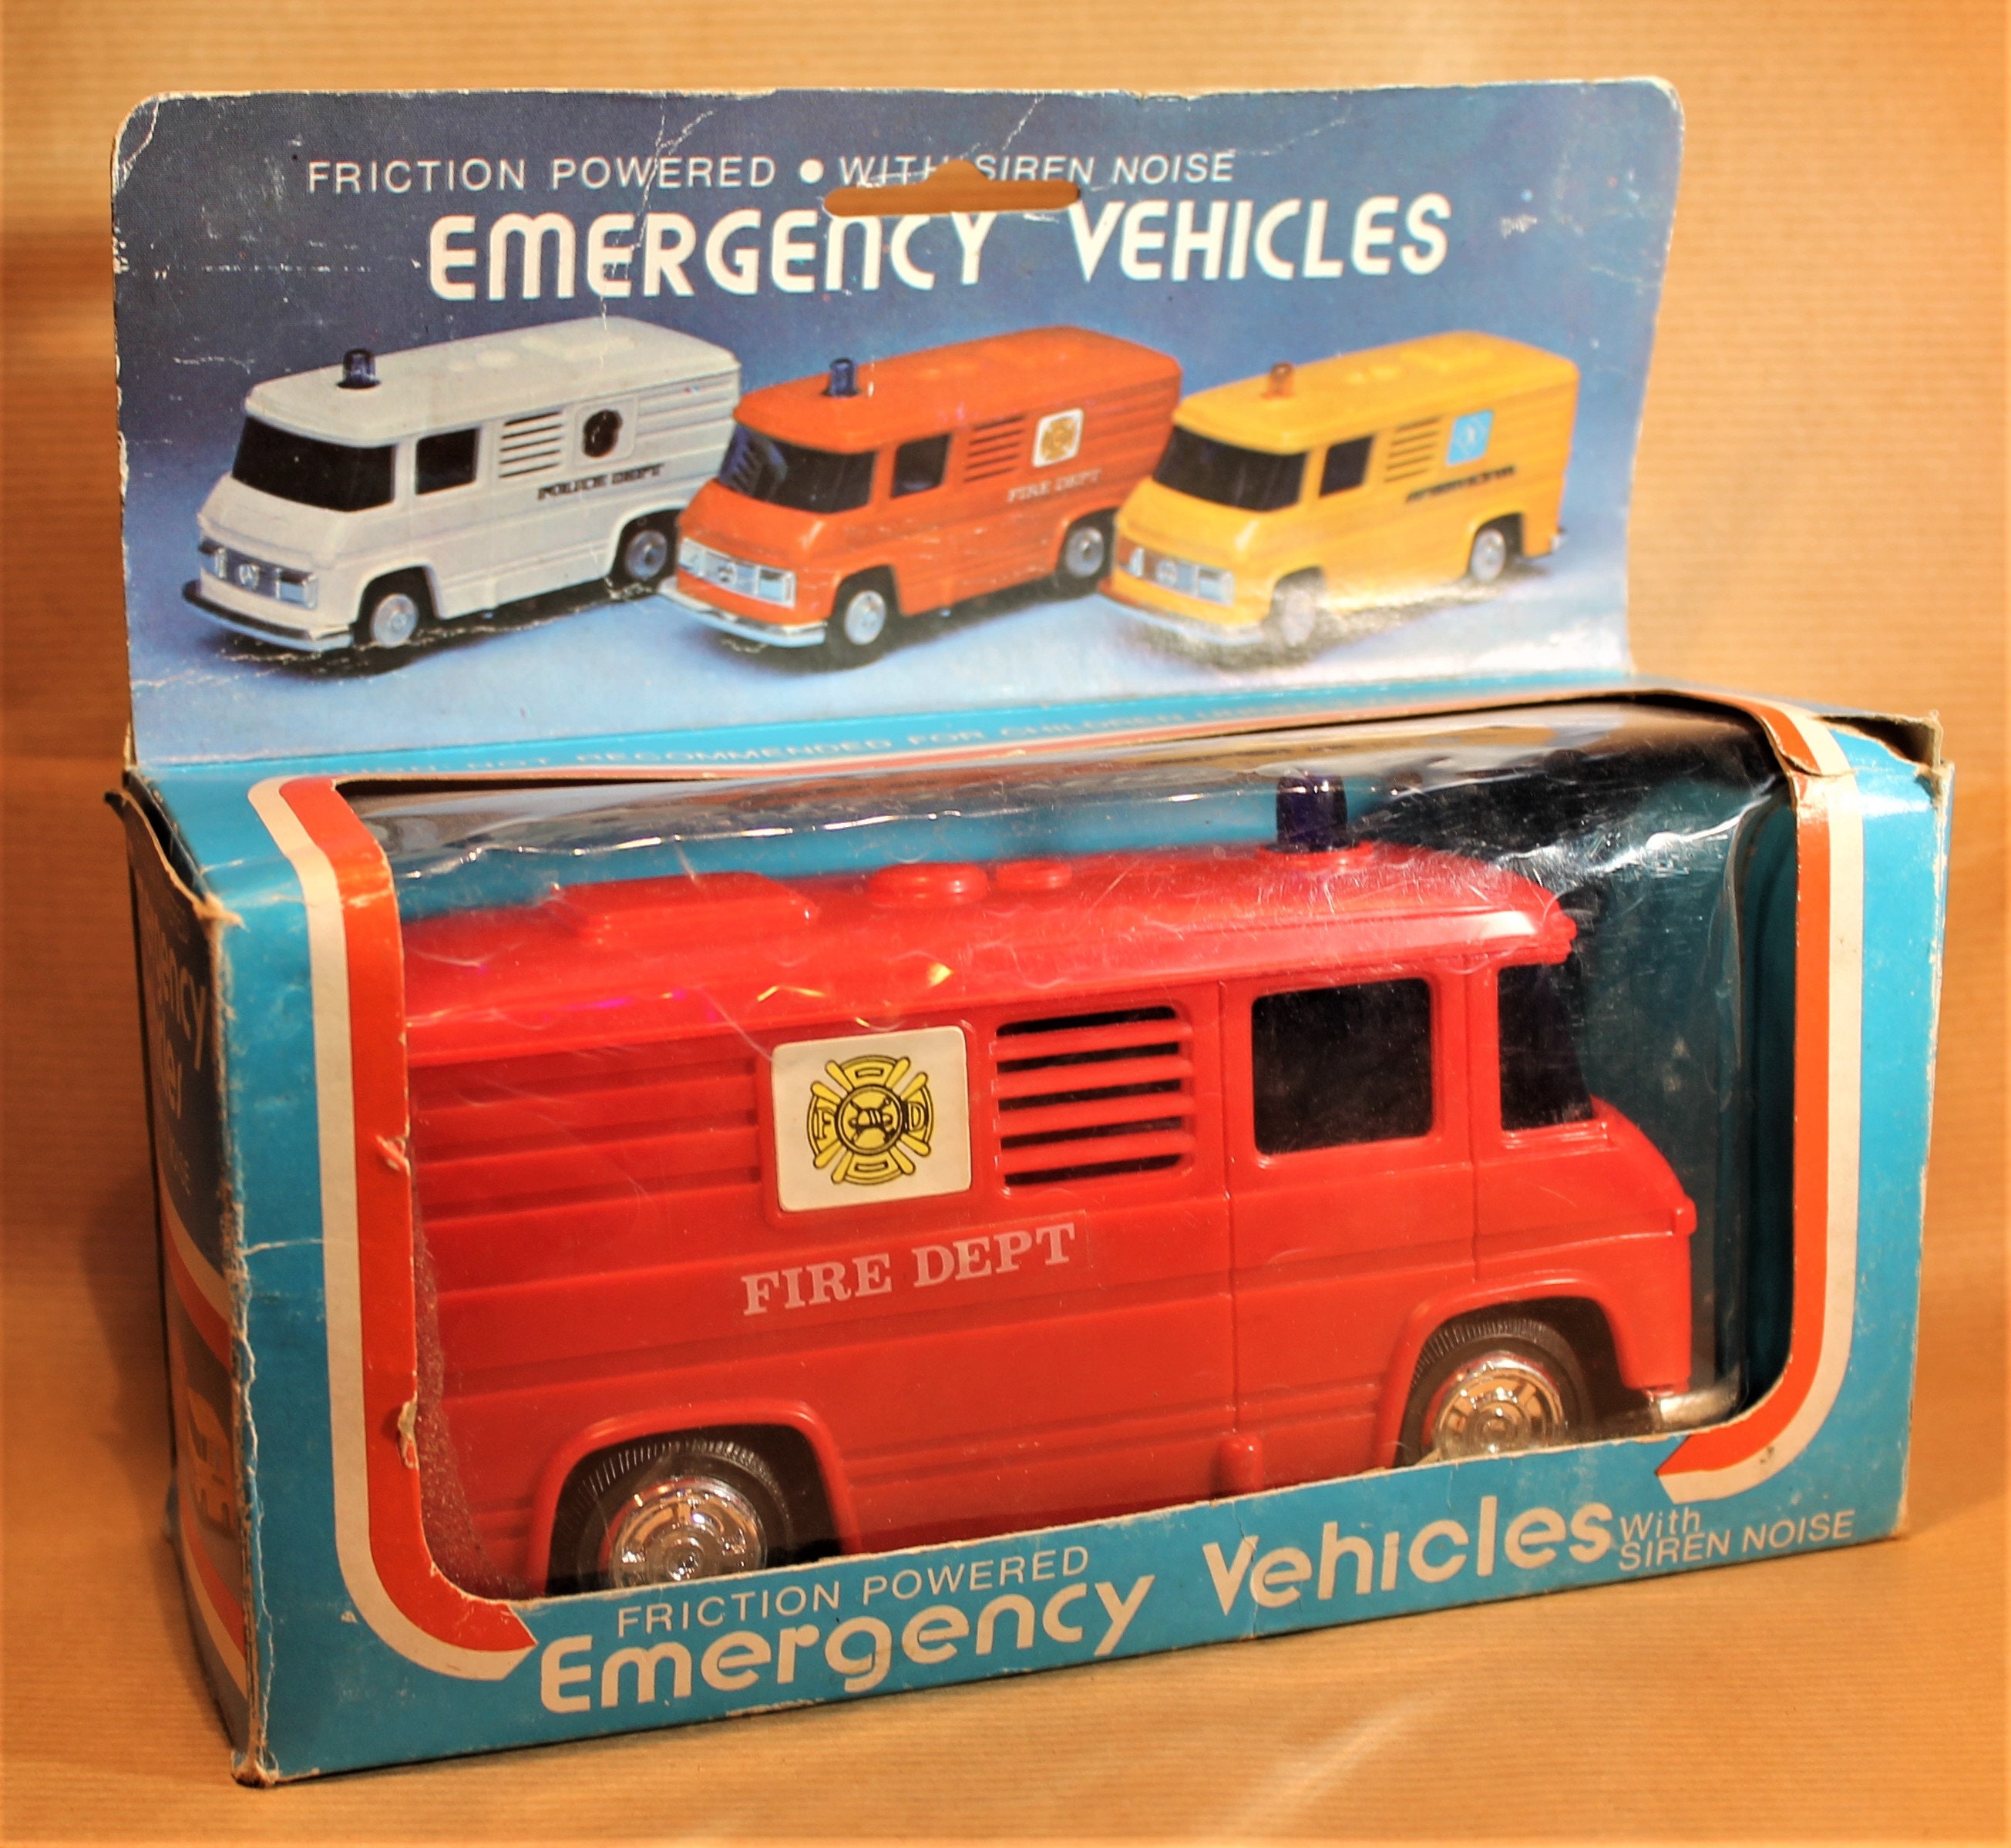 Vintage Plastic Fire Dept Truck Made in Hong Kong 1980s - Etsy Ireland